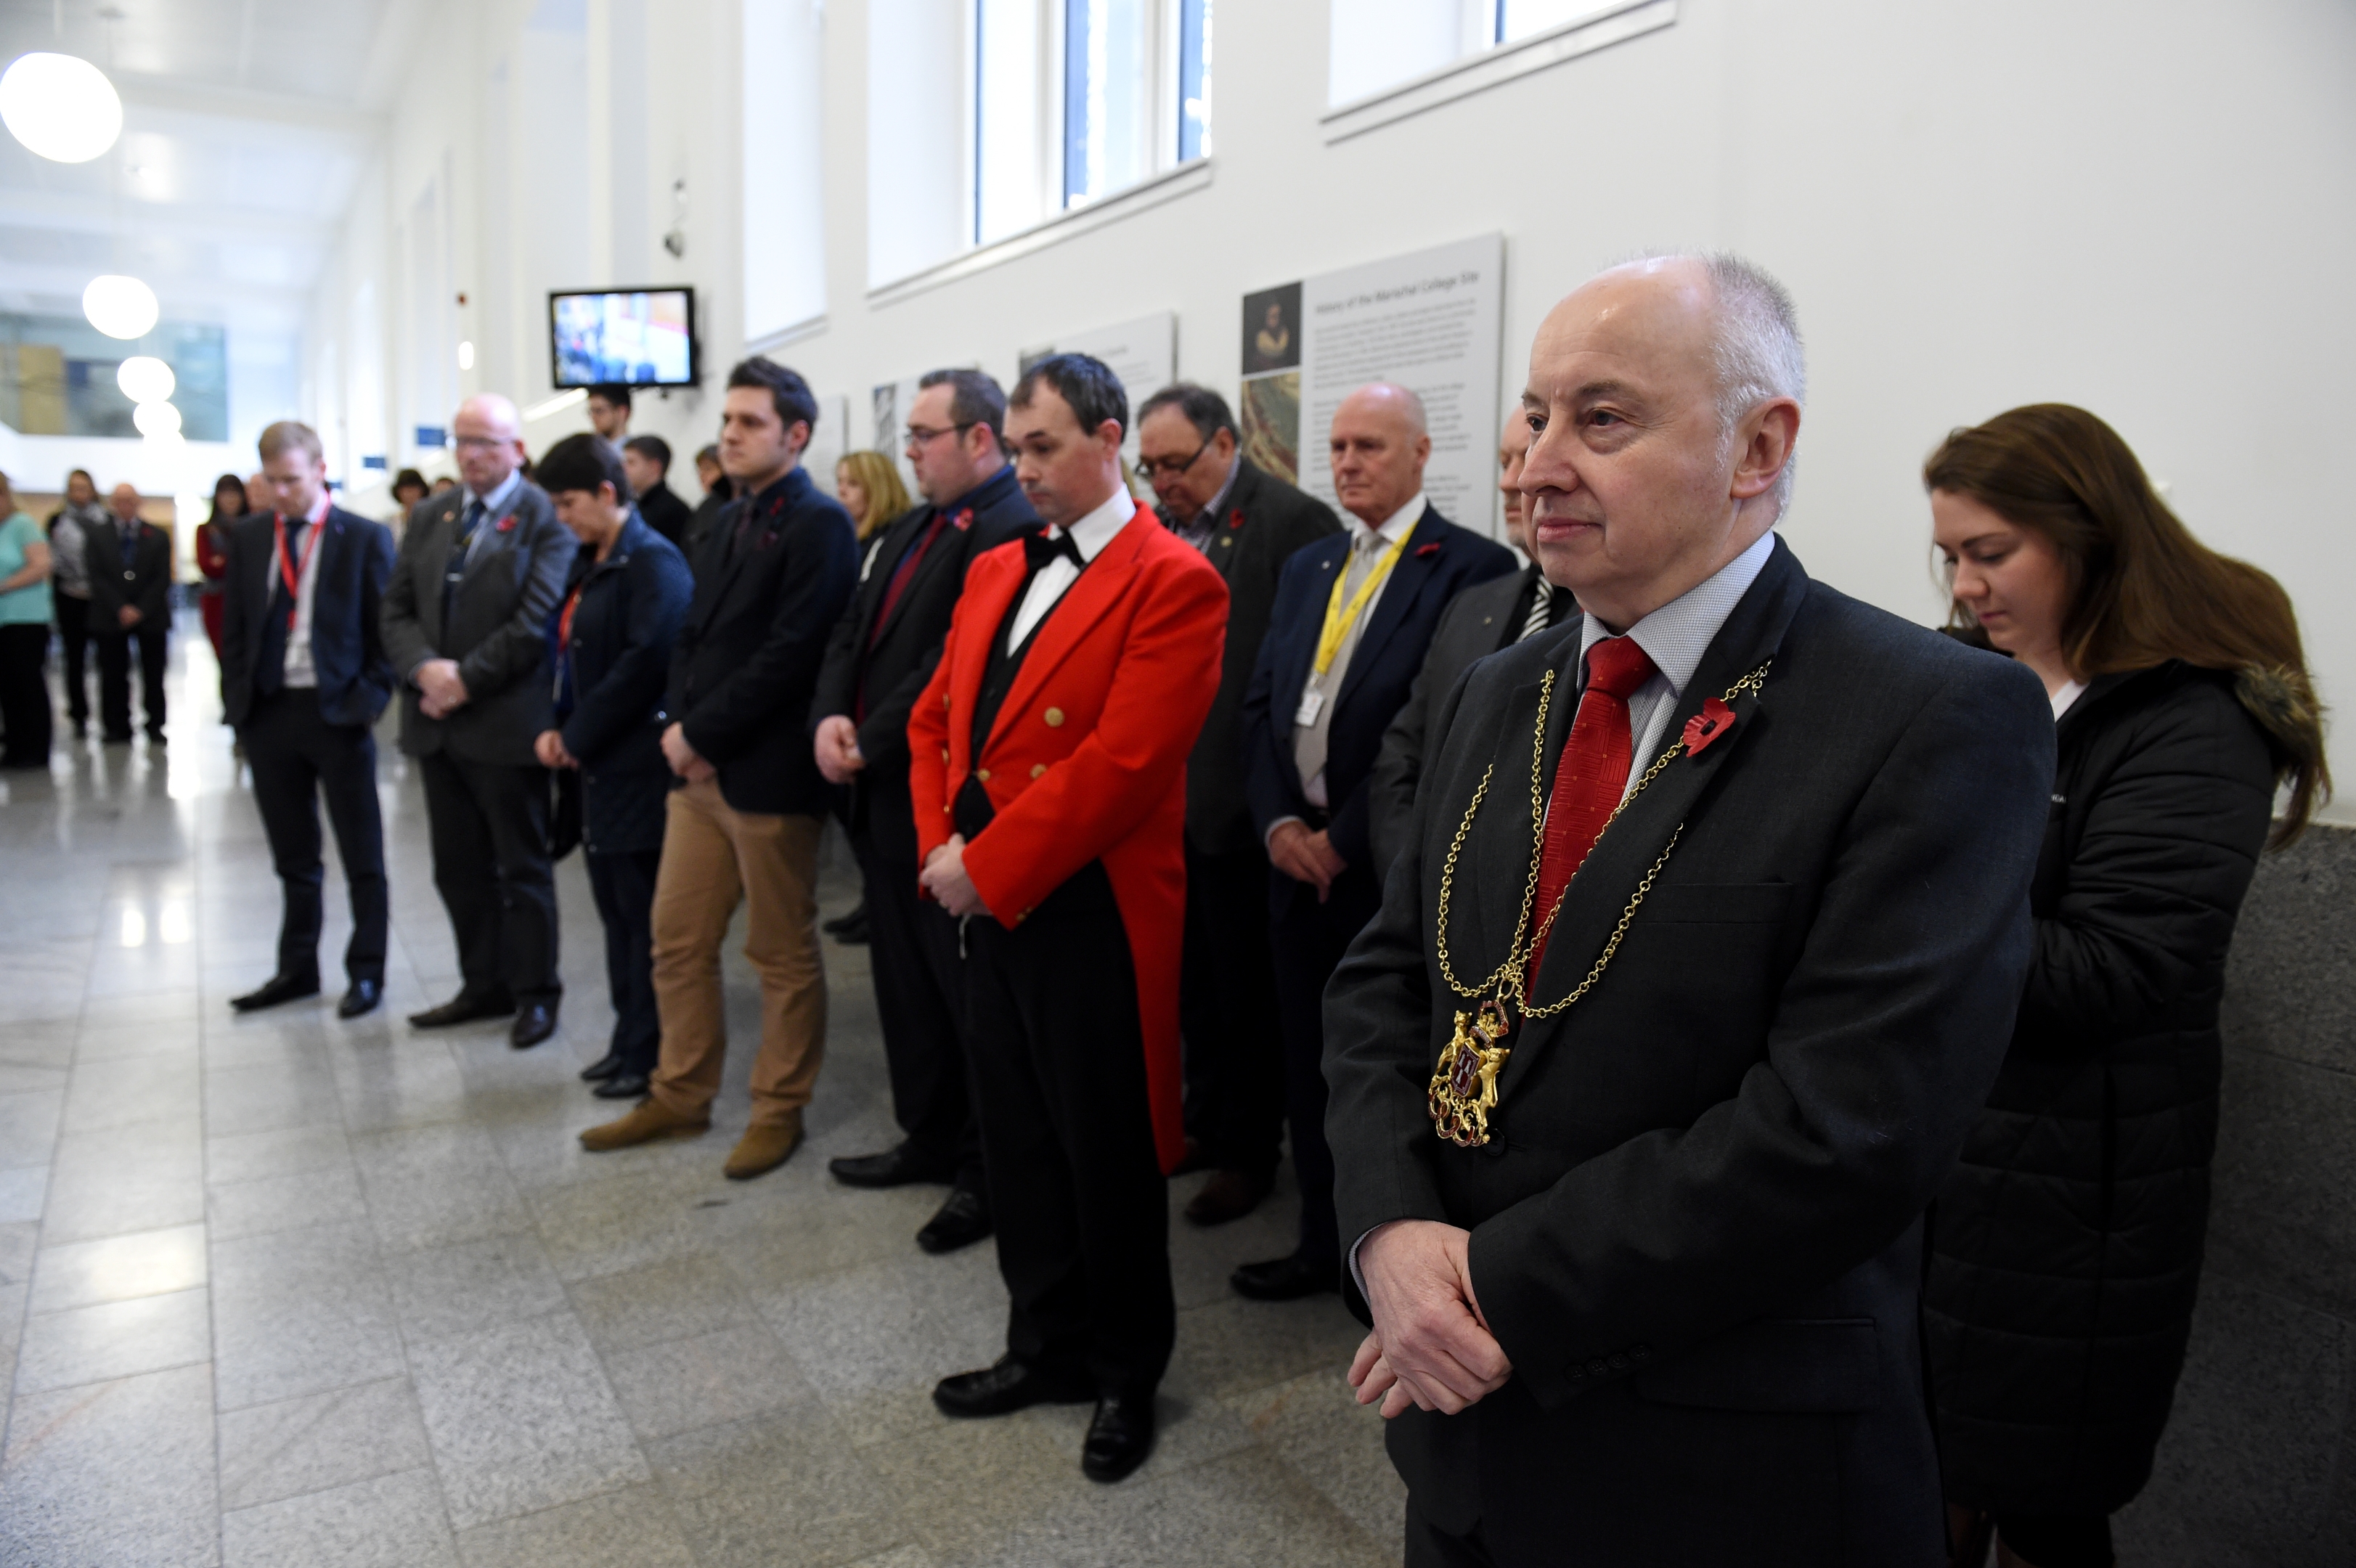 Aberdeen Lord Provost George Adam joined council staff and members of the public at Marischal College customer service area to remember the nation's war dead, and observe the national two-minute silence.